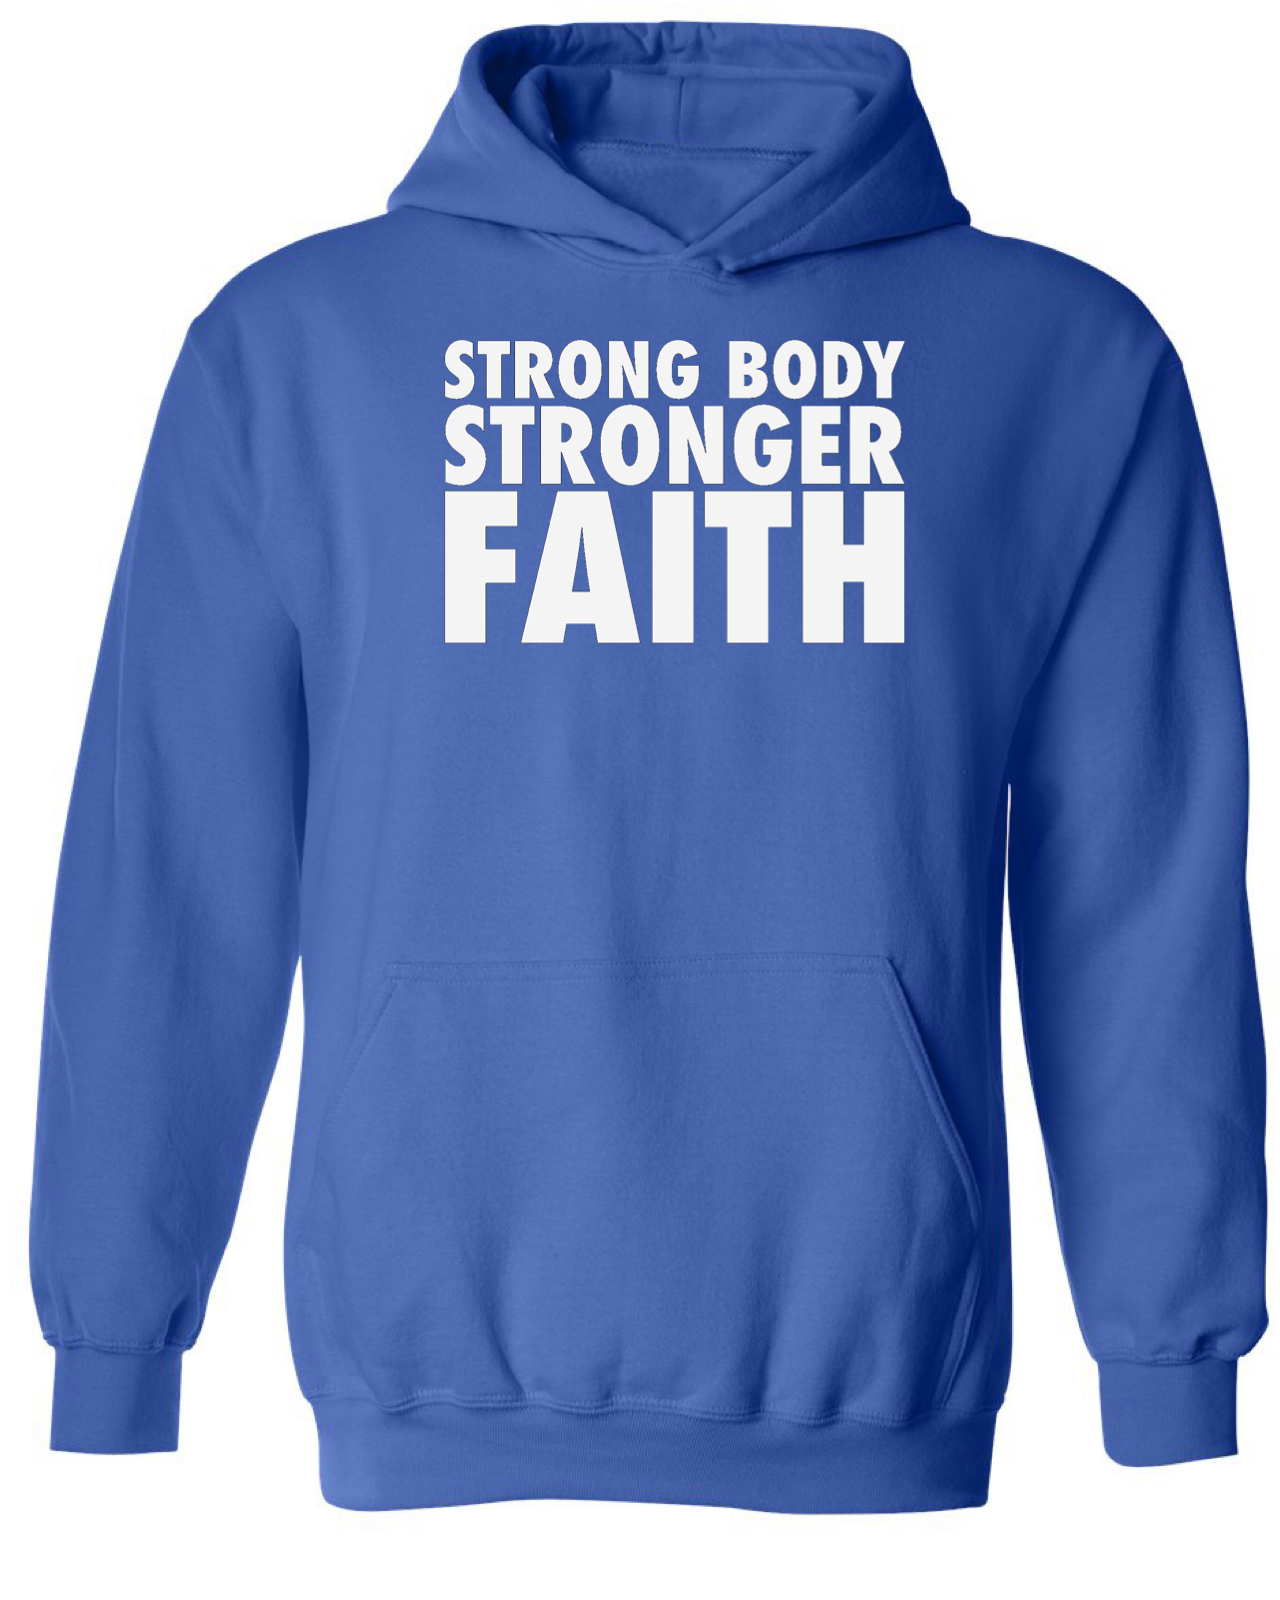 Men's Strong Body Stronger Faith Bright Colors Hoodie